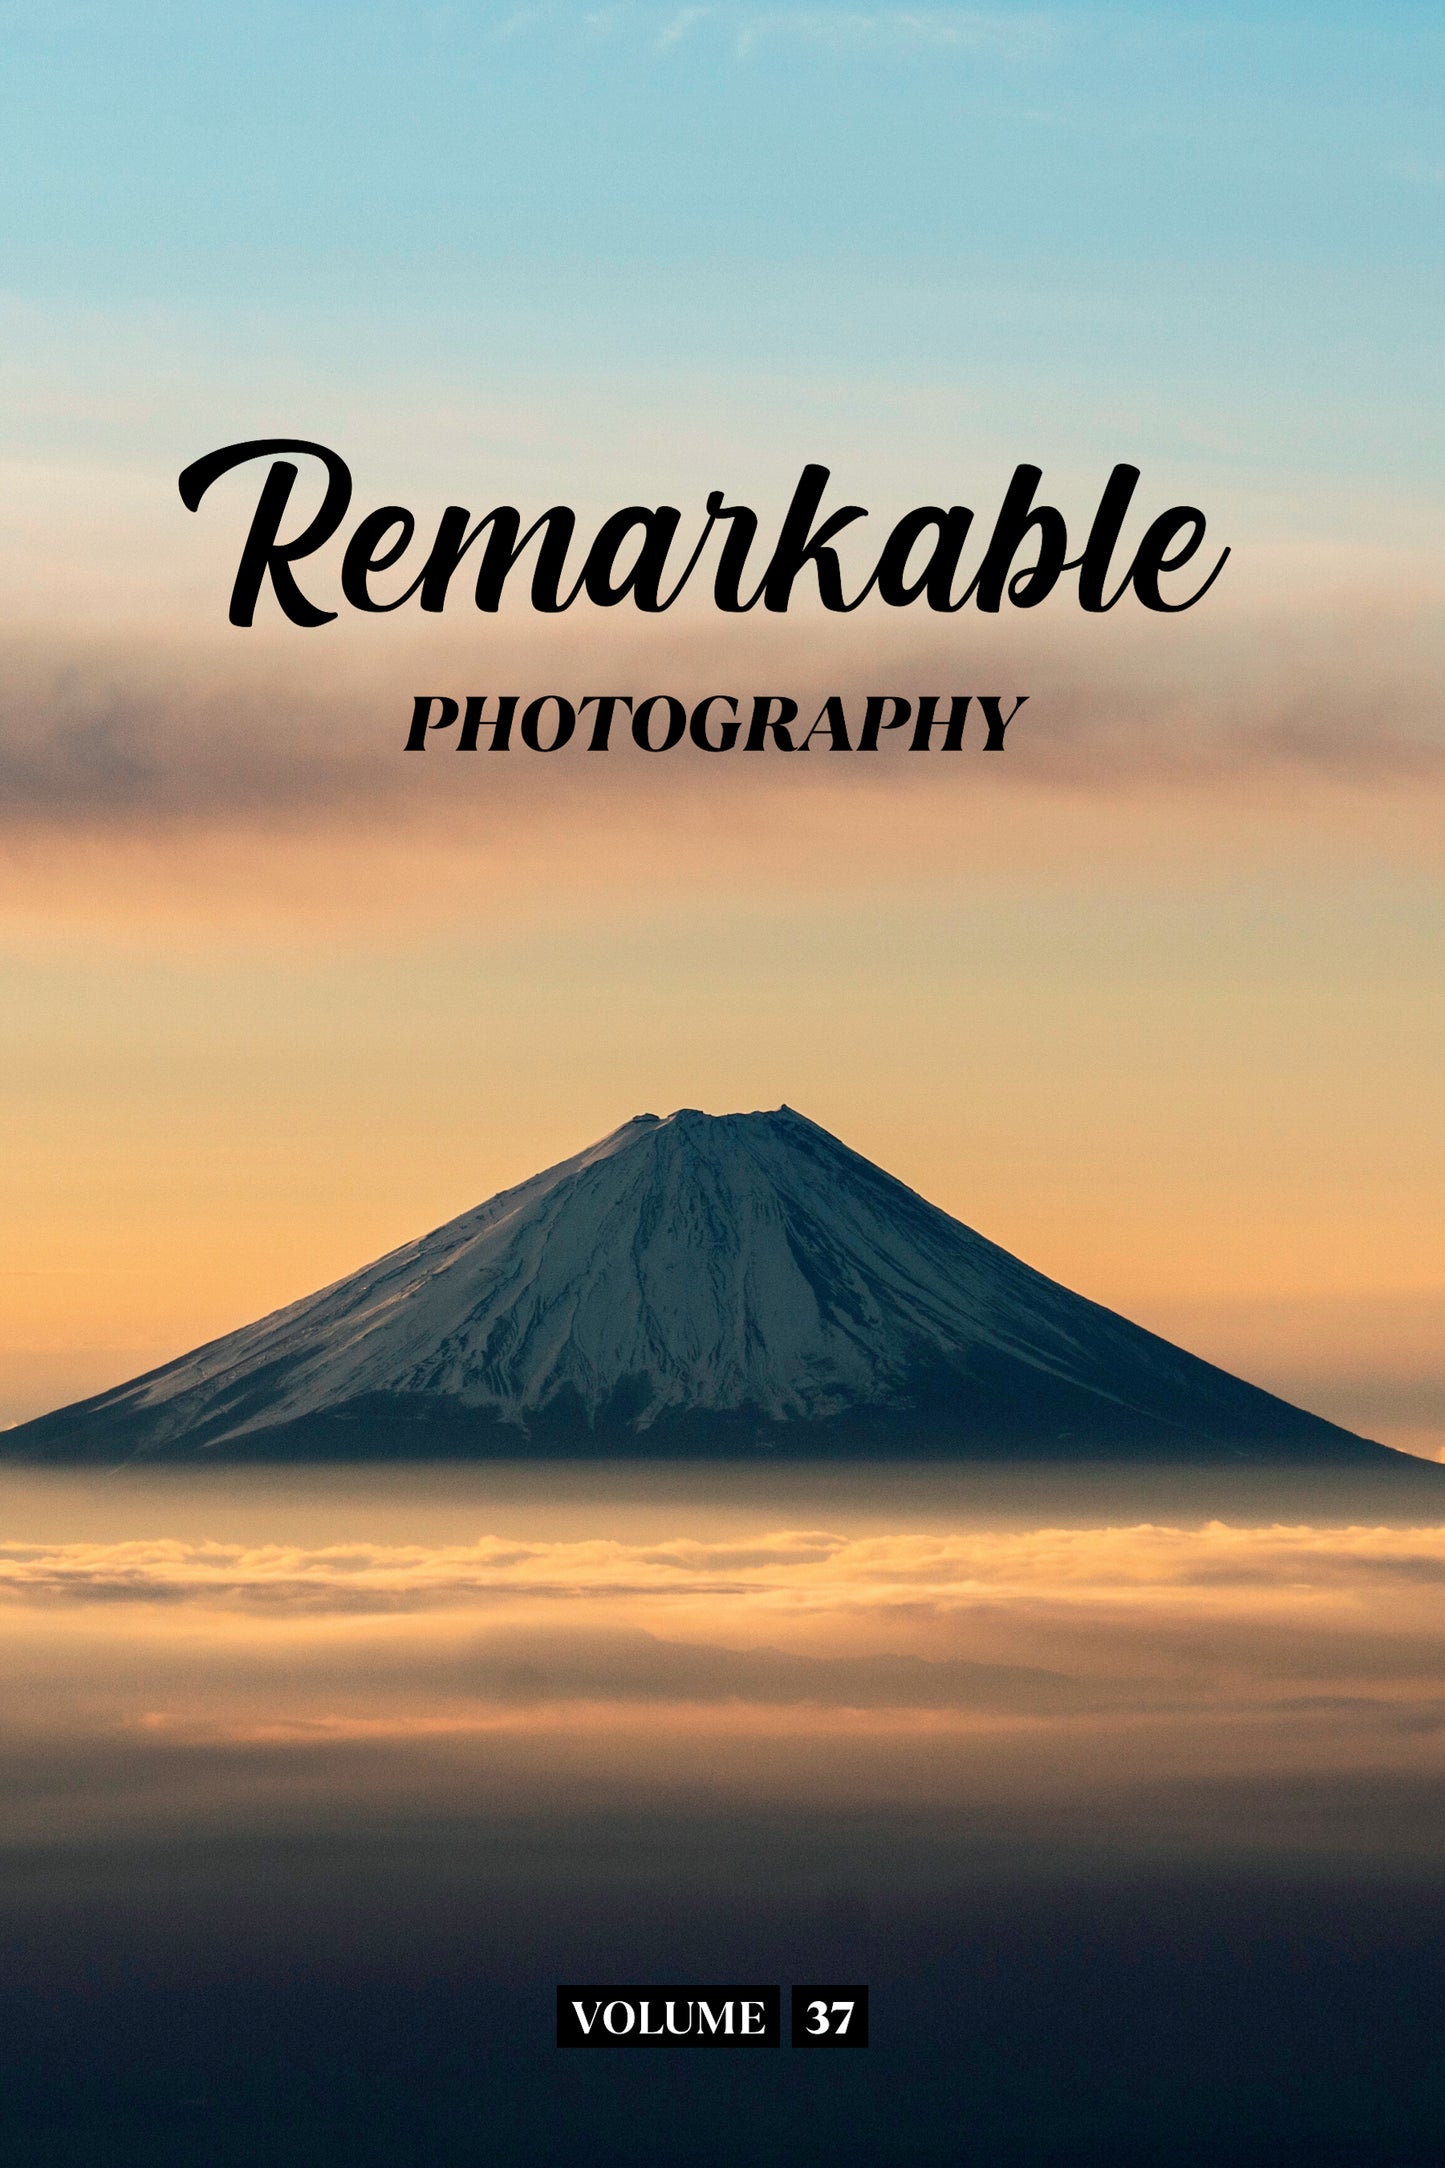 Remarkable Photography Volume 37 (Physical Book Pre-Order)